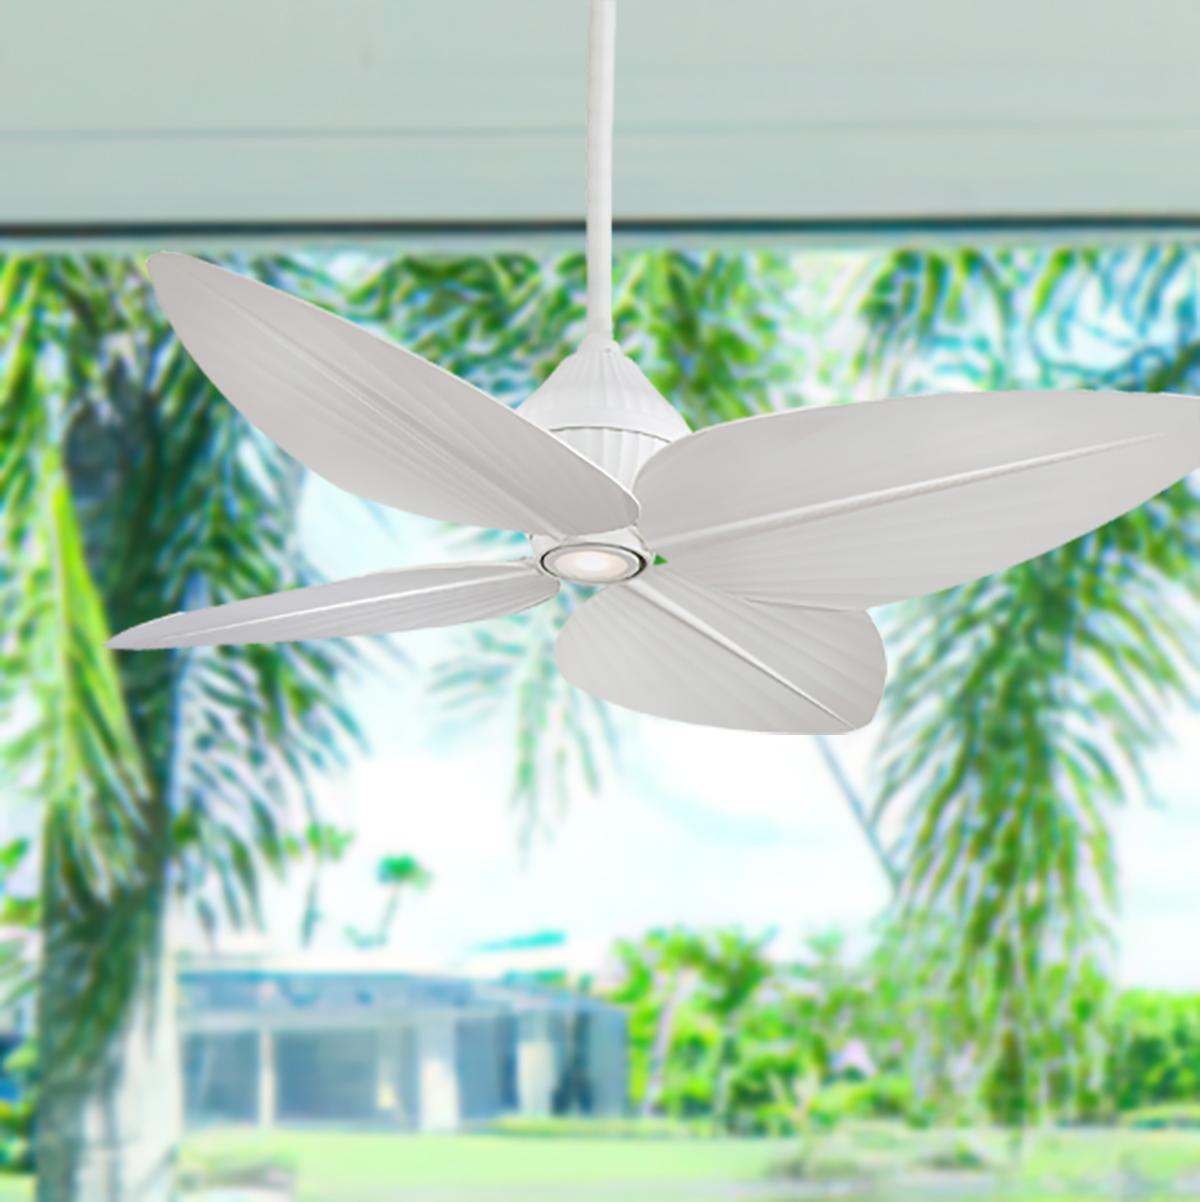 Gauguin 52 Inch Leaf Blades Outdoor Ceiling Fan With Light And Wall Control